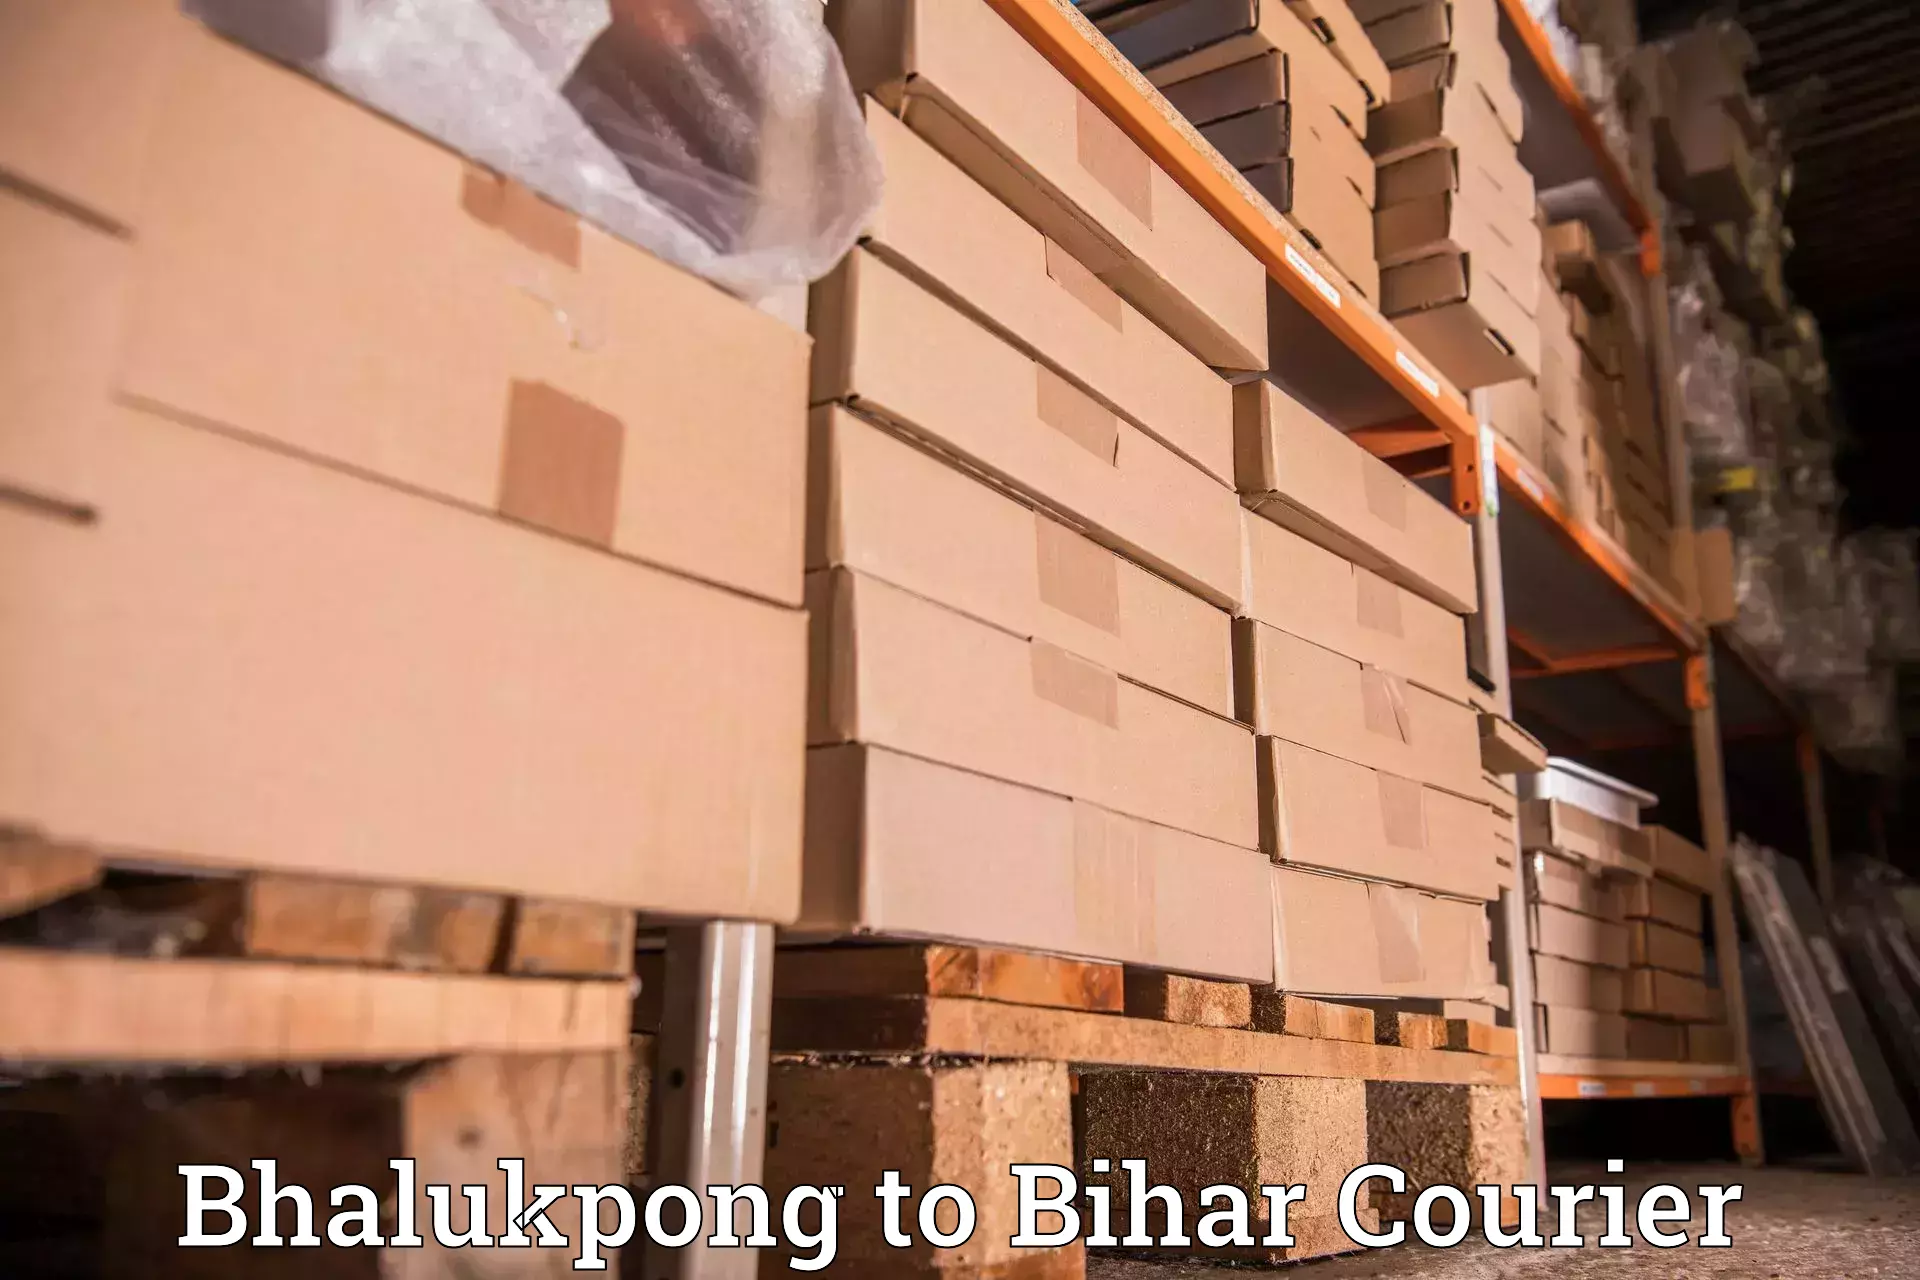 Courier service comparison Bhalukpong to Sasaram